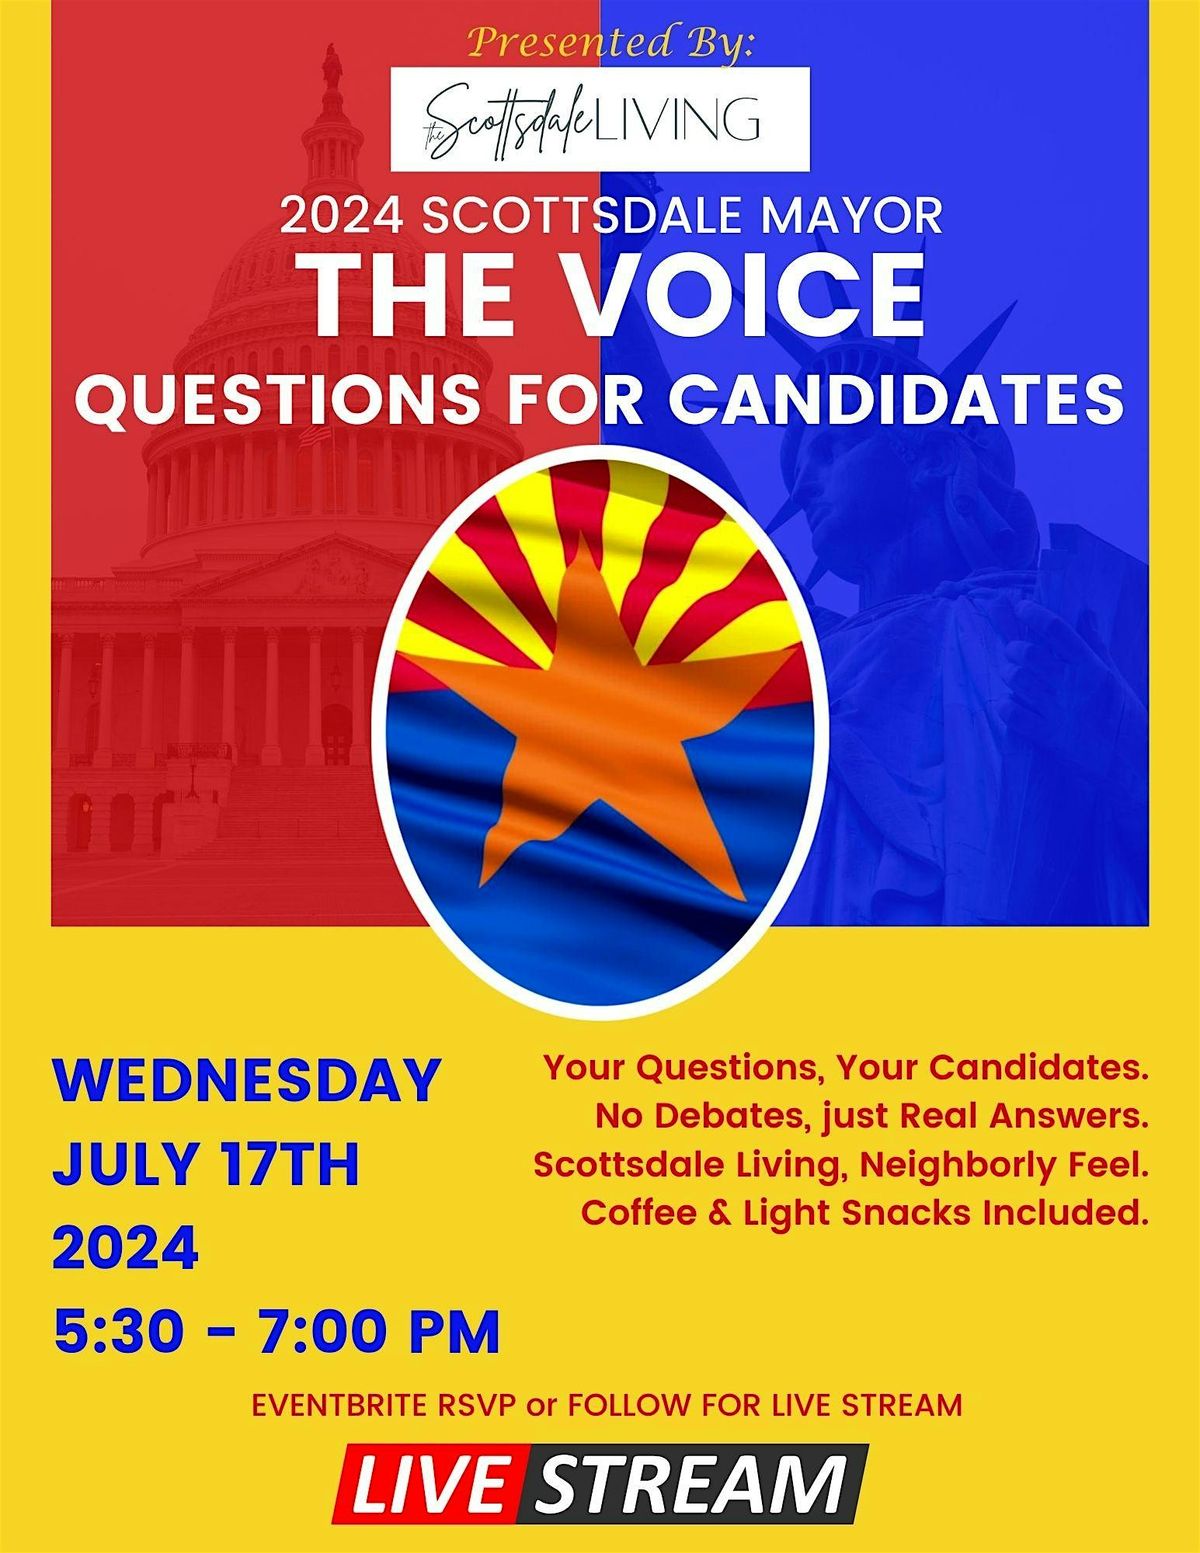 The Voice - Questions for Candidates by Scottsdale Living